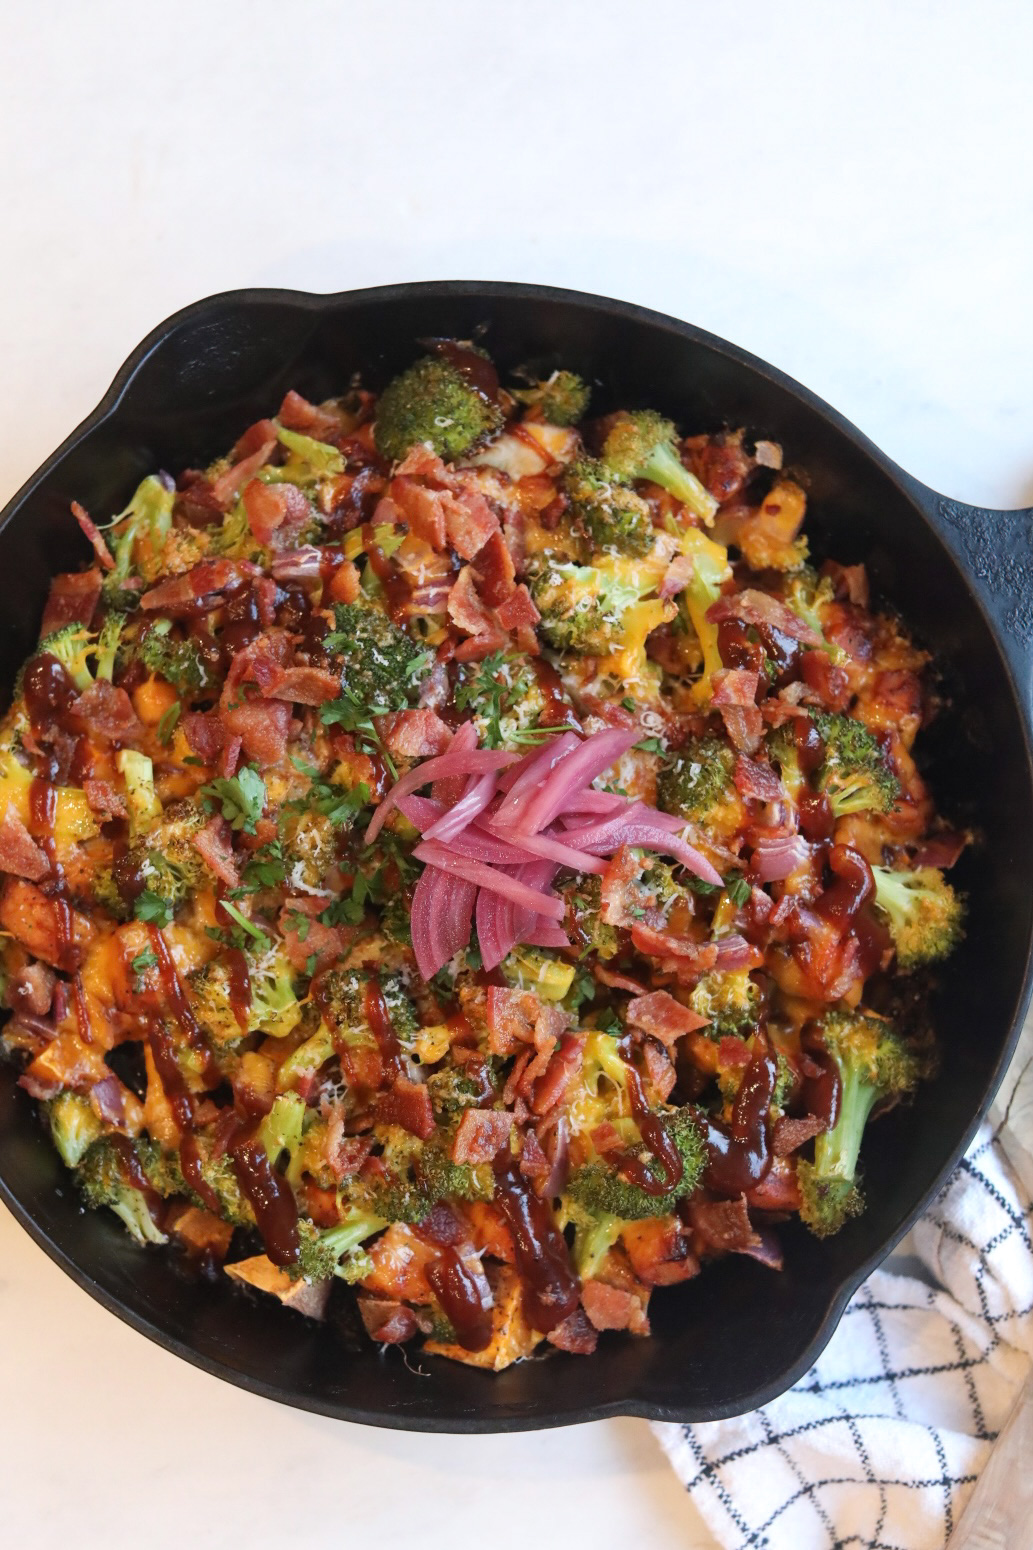 BBQ Chicken Sweet Potato Skillet in a black iron cast skillet. Skillet dish includes sweet potatoes, chicken, broccoli, red onion, cilantro and topped with pickled red onions.